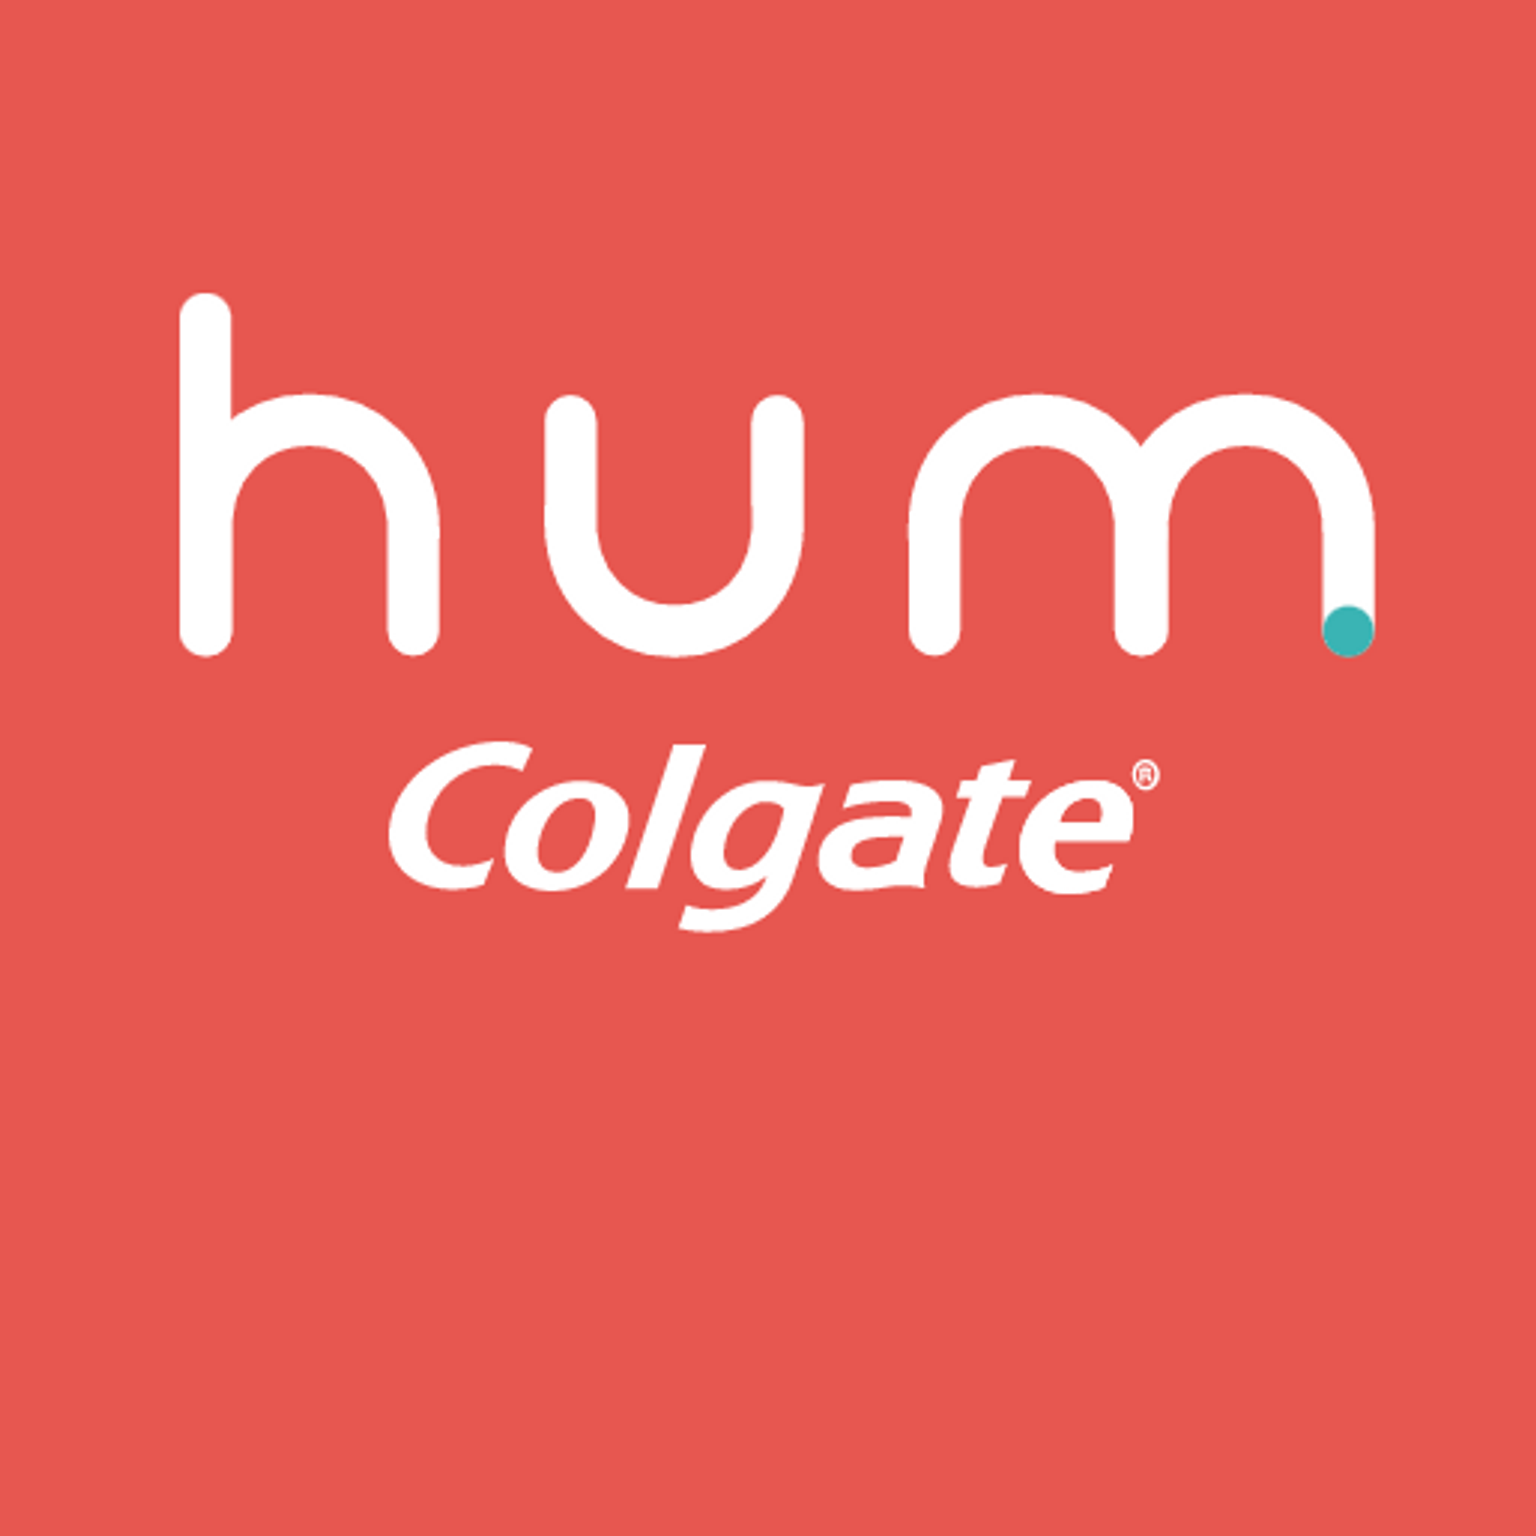 hum by Colgate logo on a red background